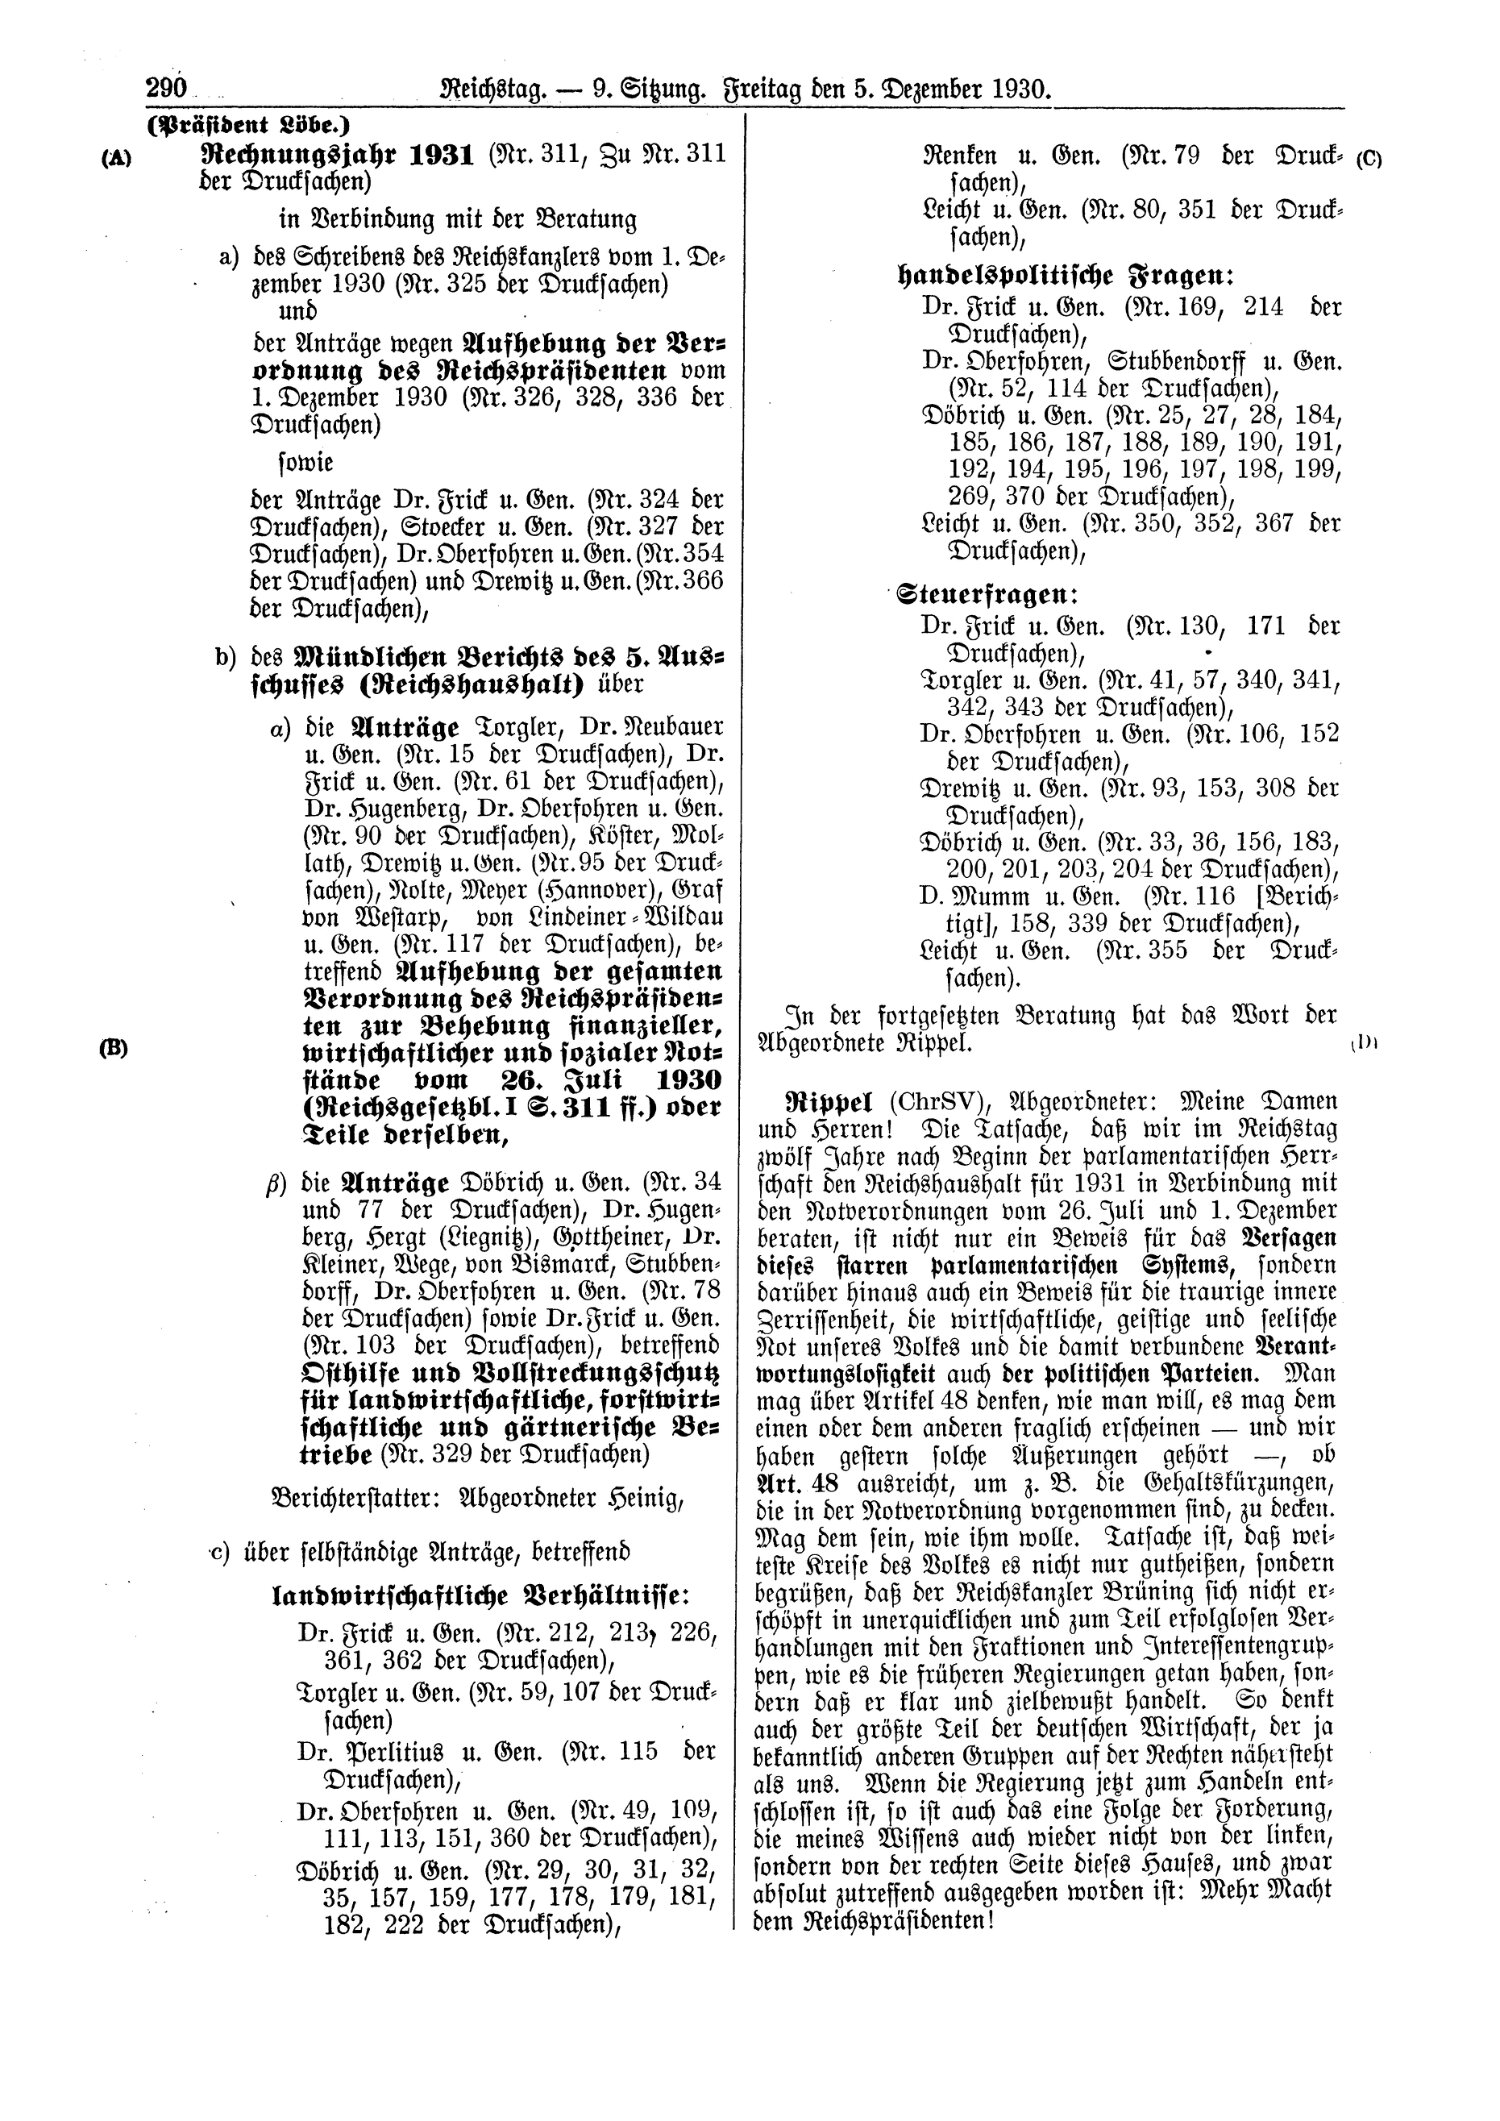 Scan of page 290